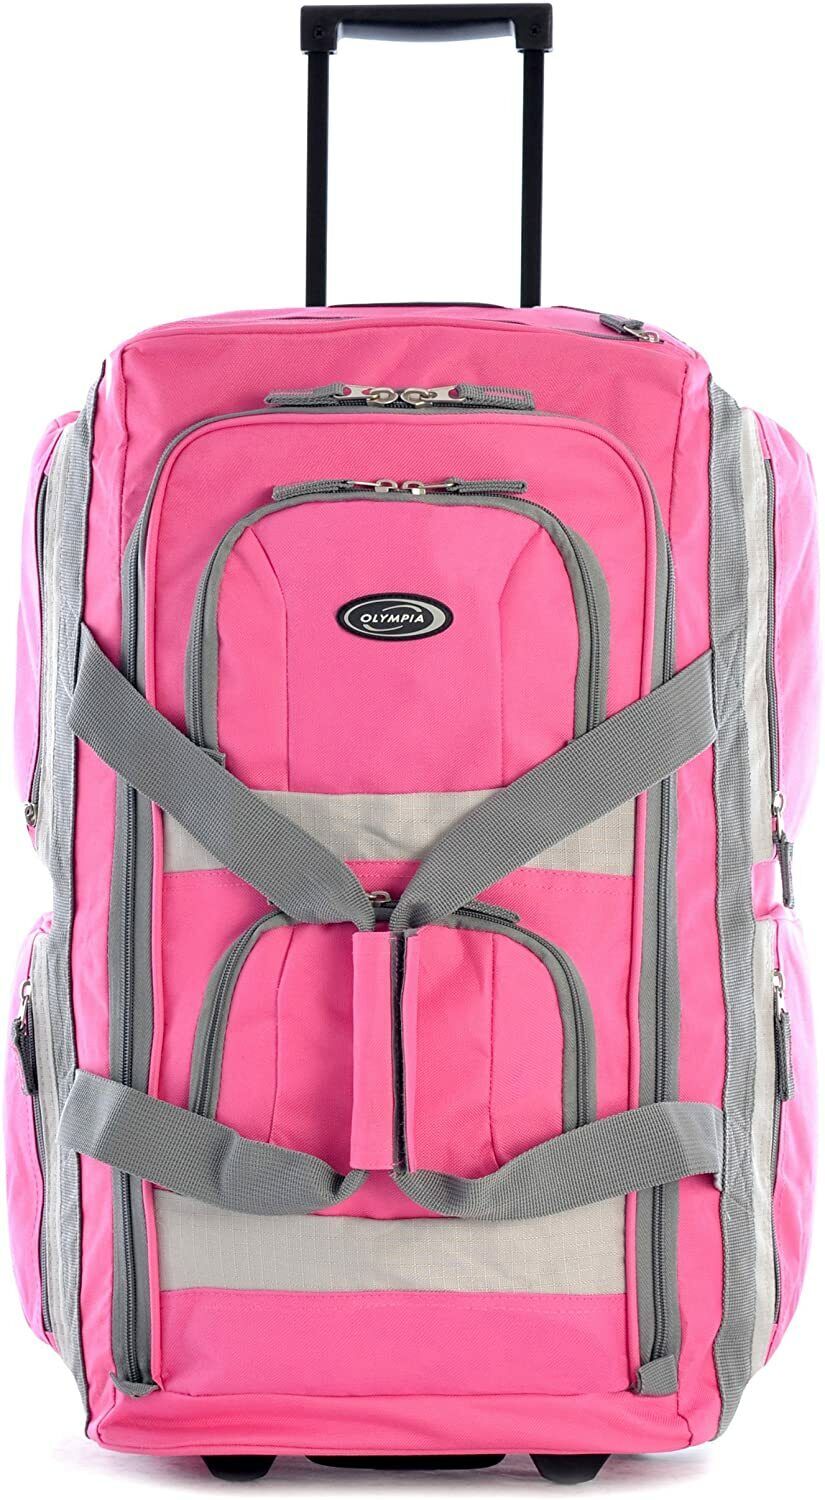 Rolling Carry On Bag Travel Luggage Pink Duffel With Wheels 